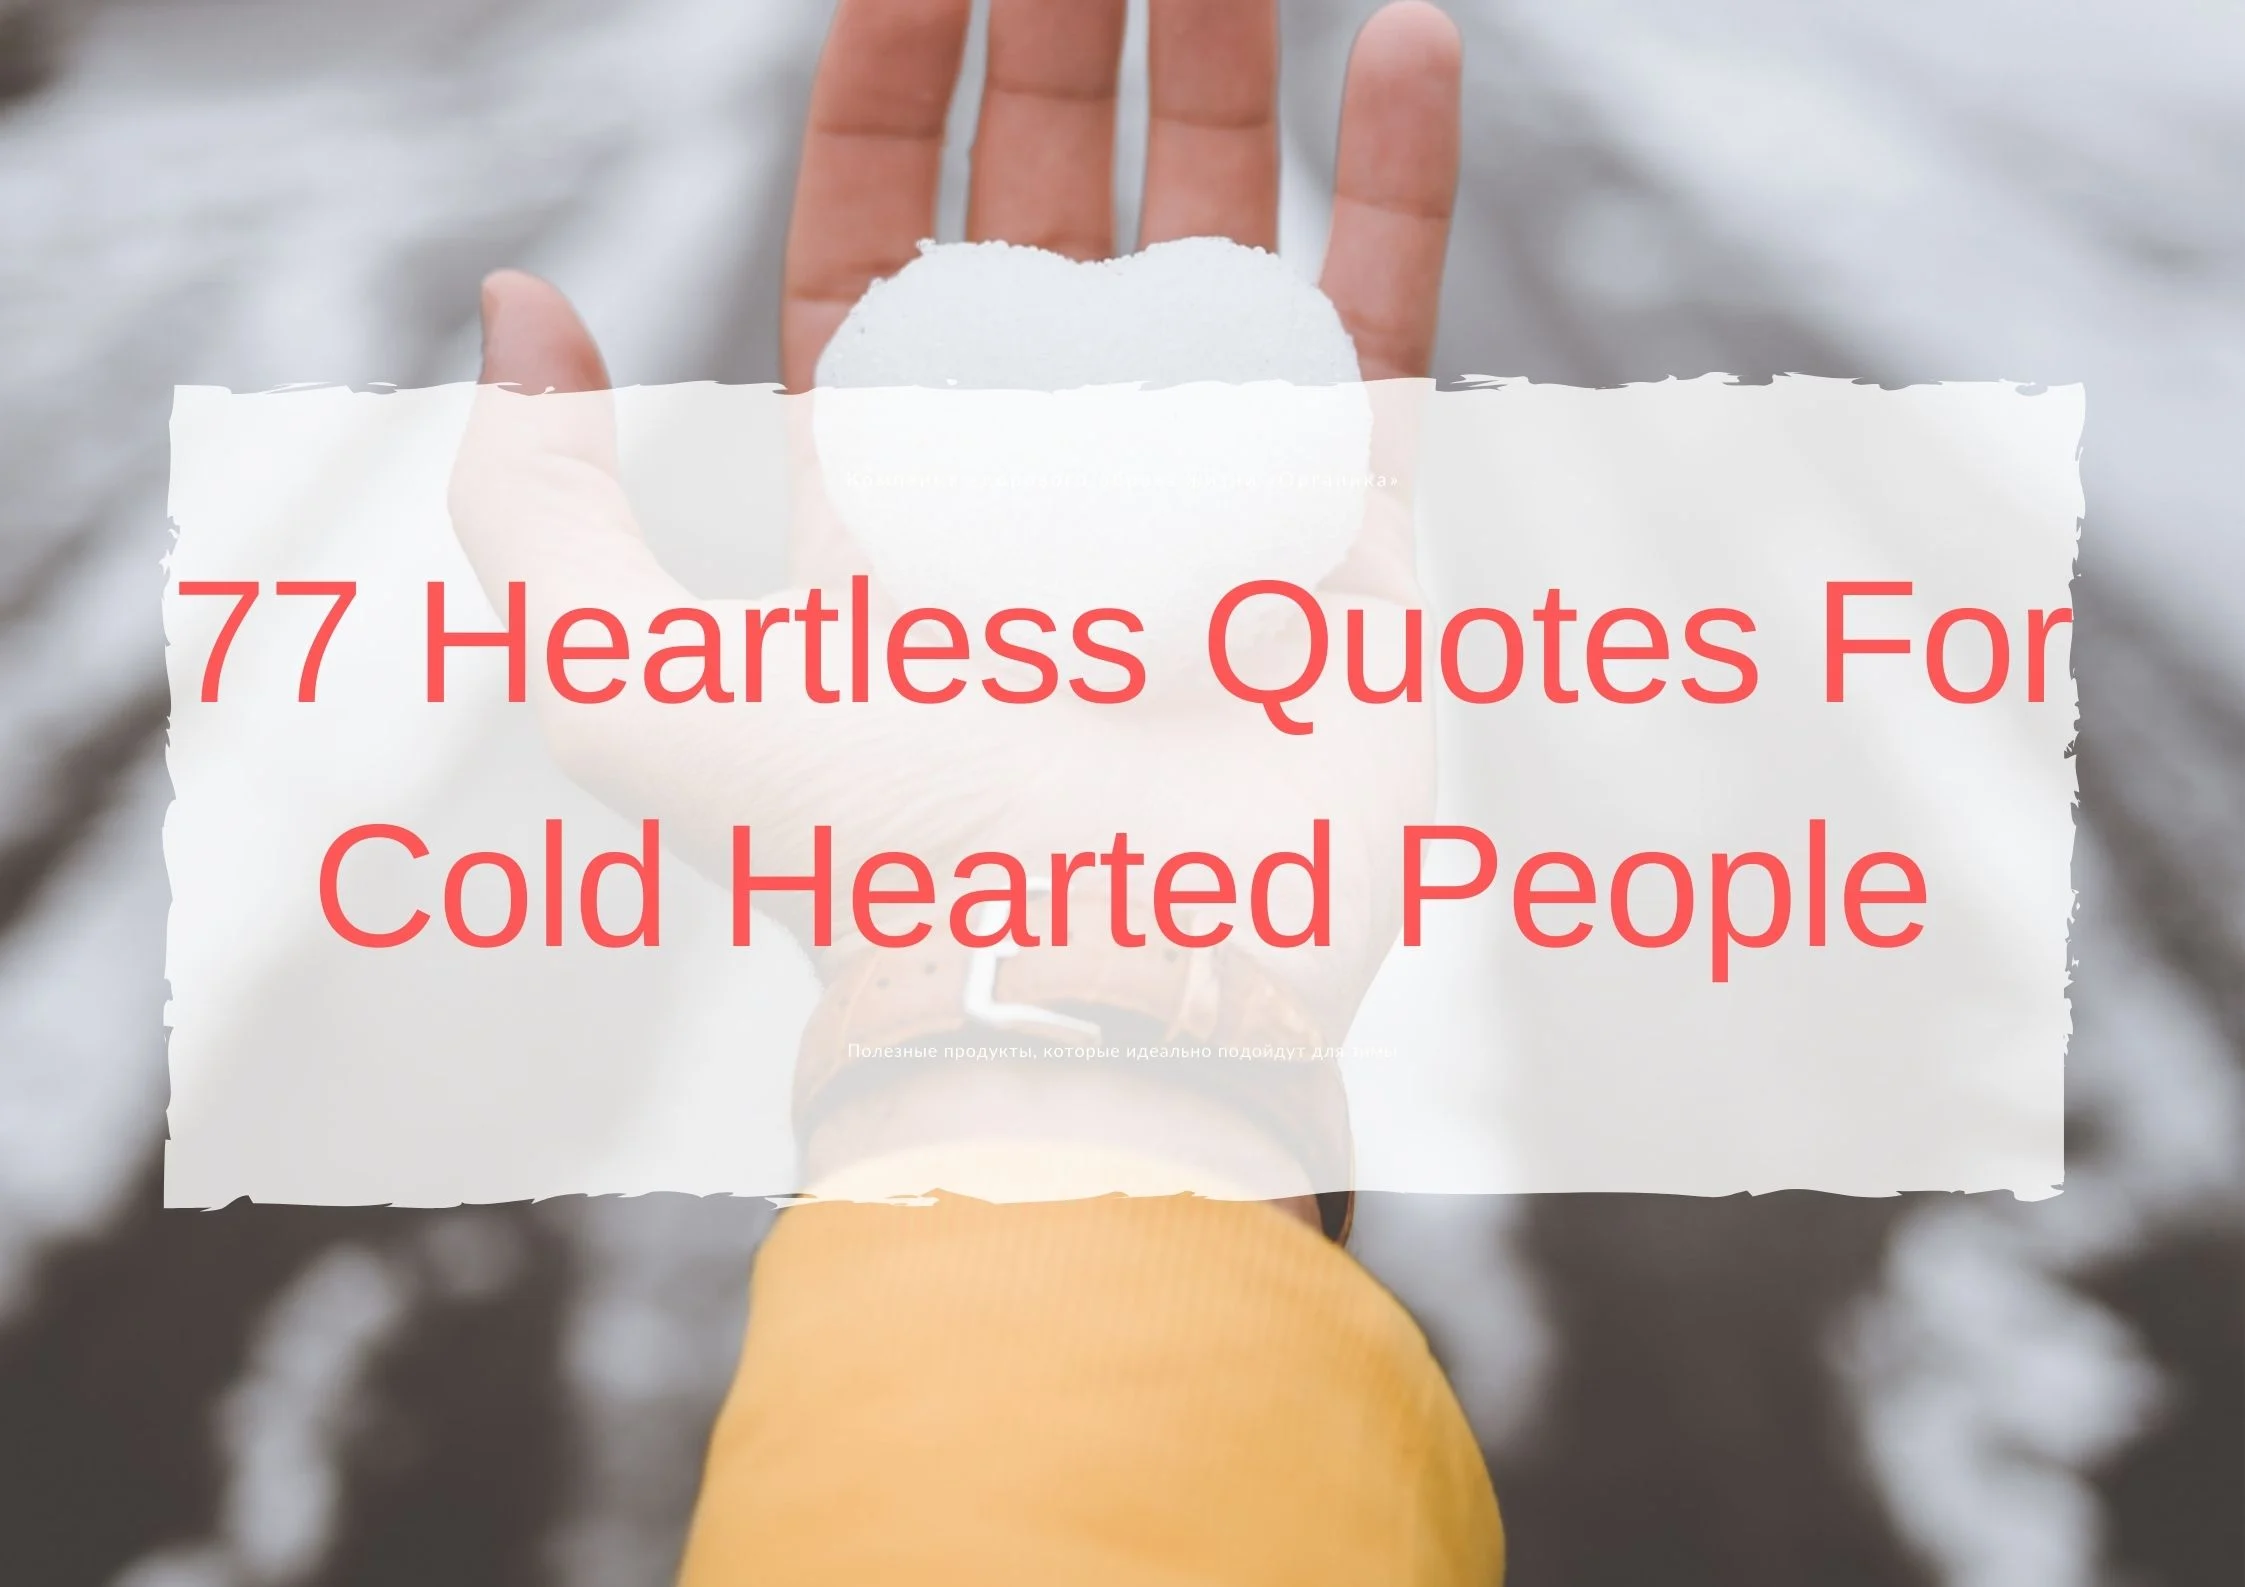 77 Heartless Quotes For Cold Hearted People